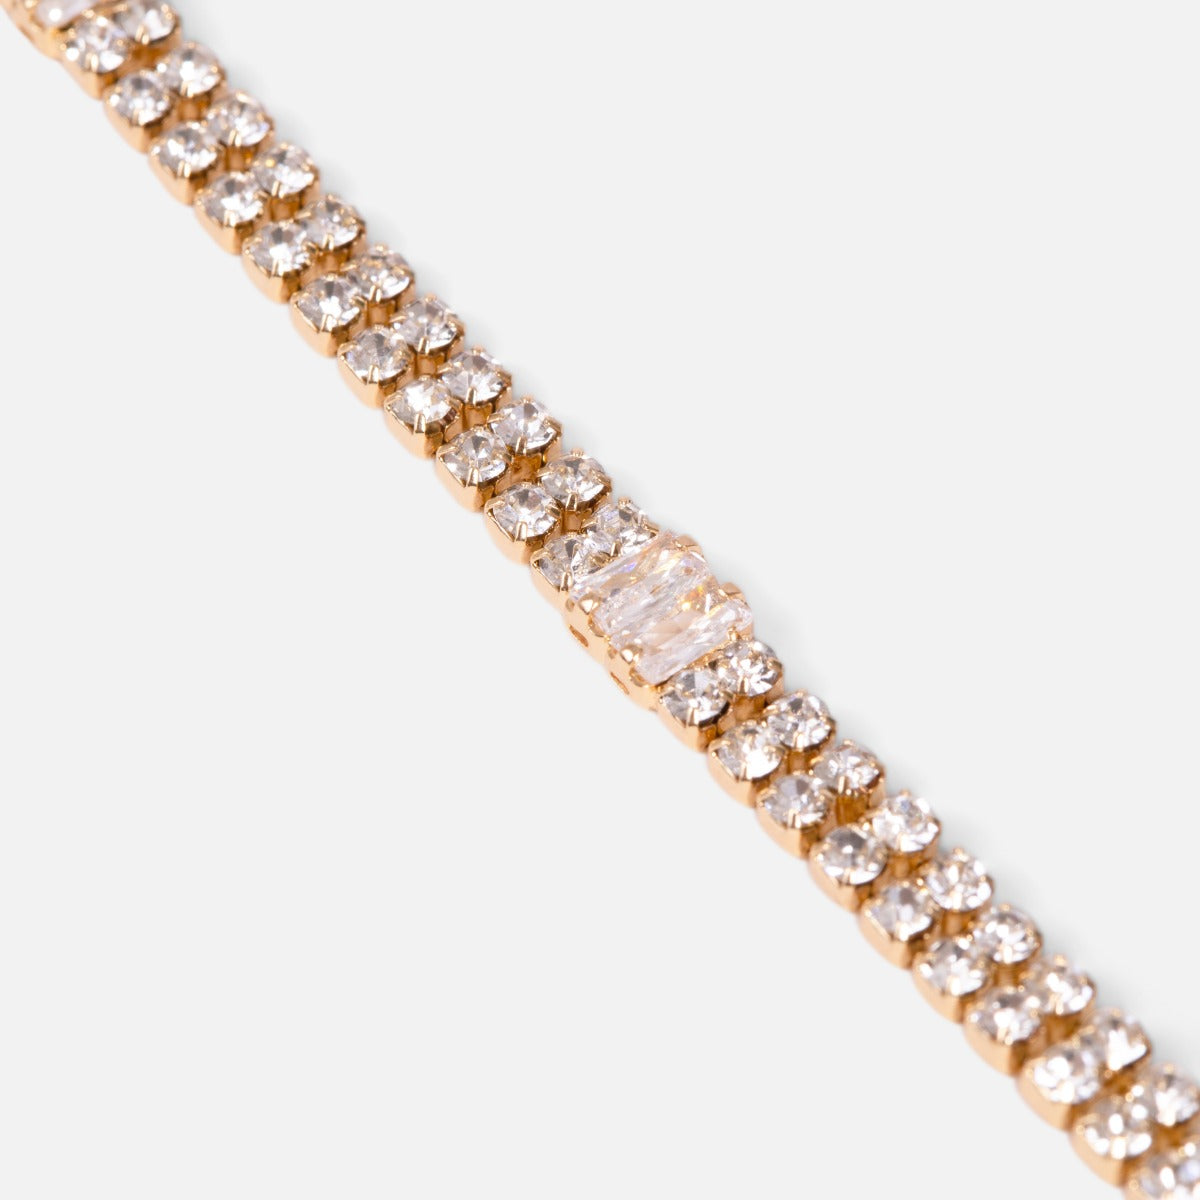 Wide insertions of golden sparkling stones choker necklace